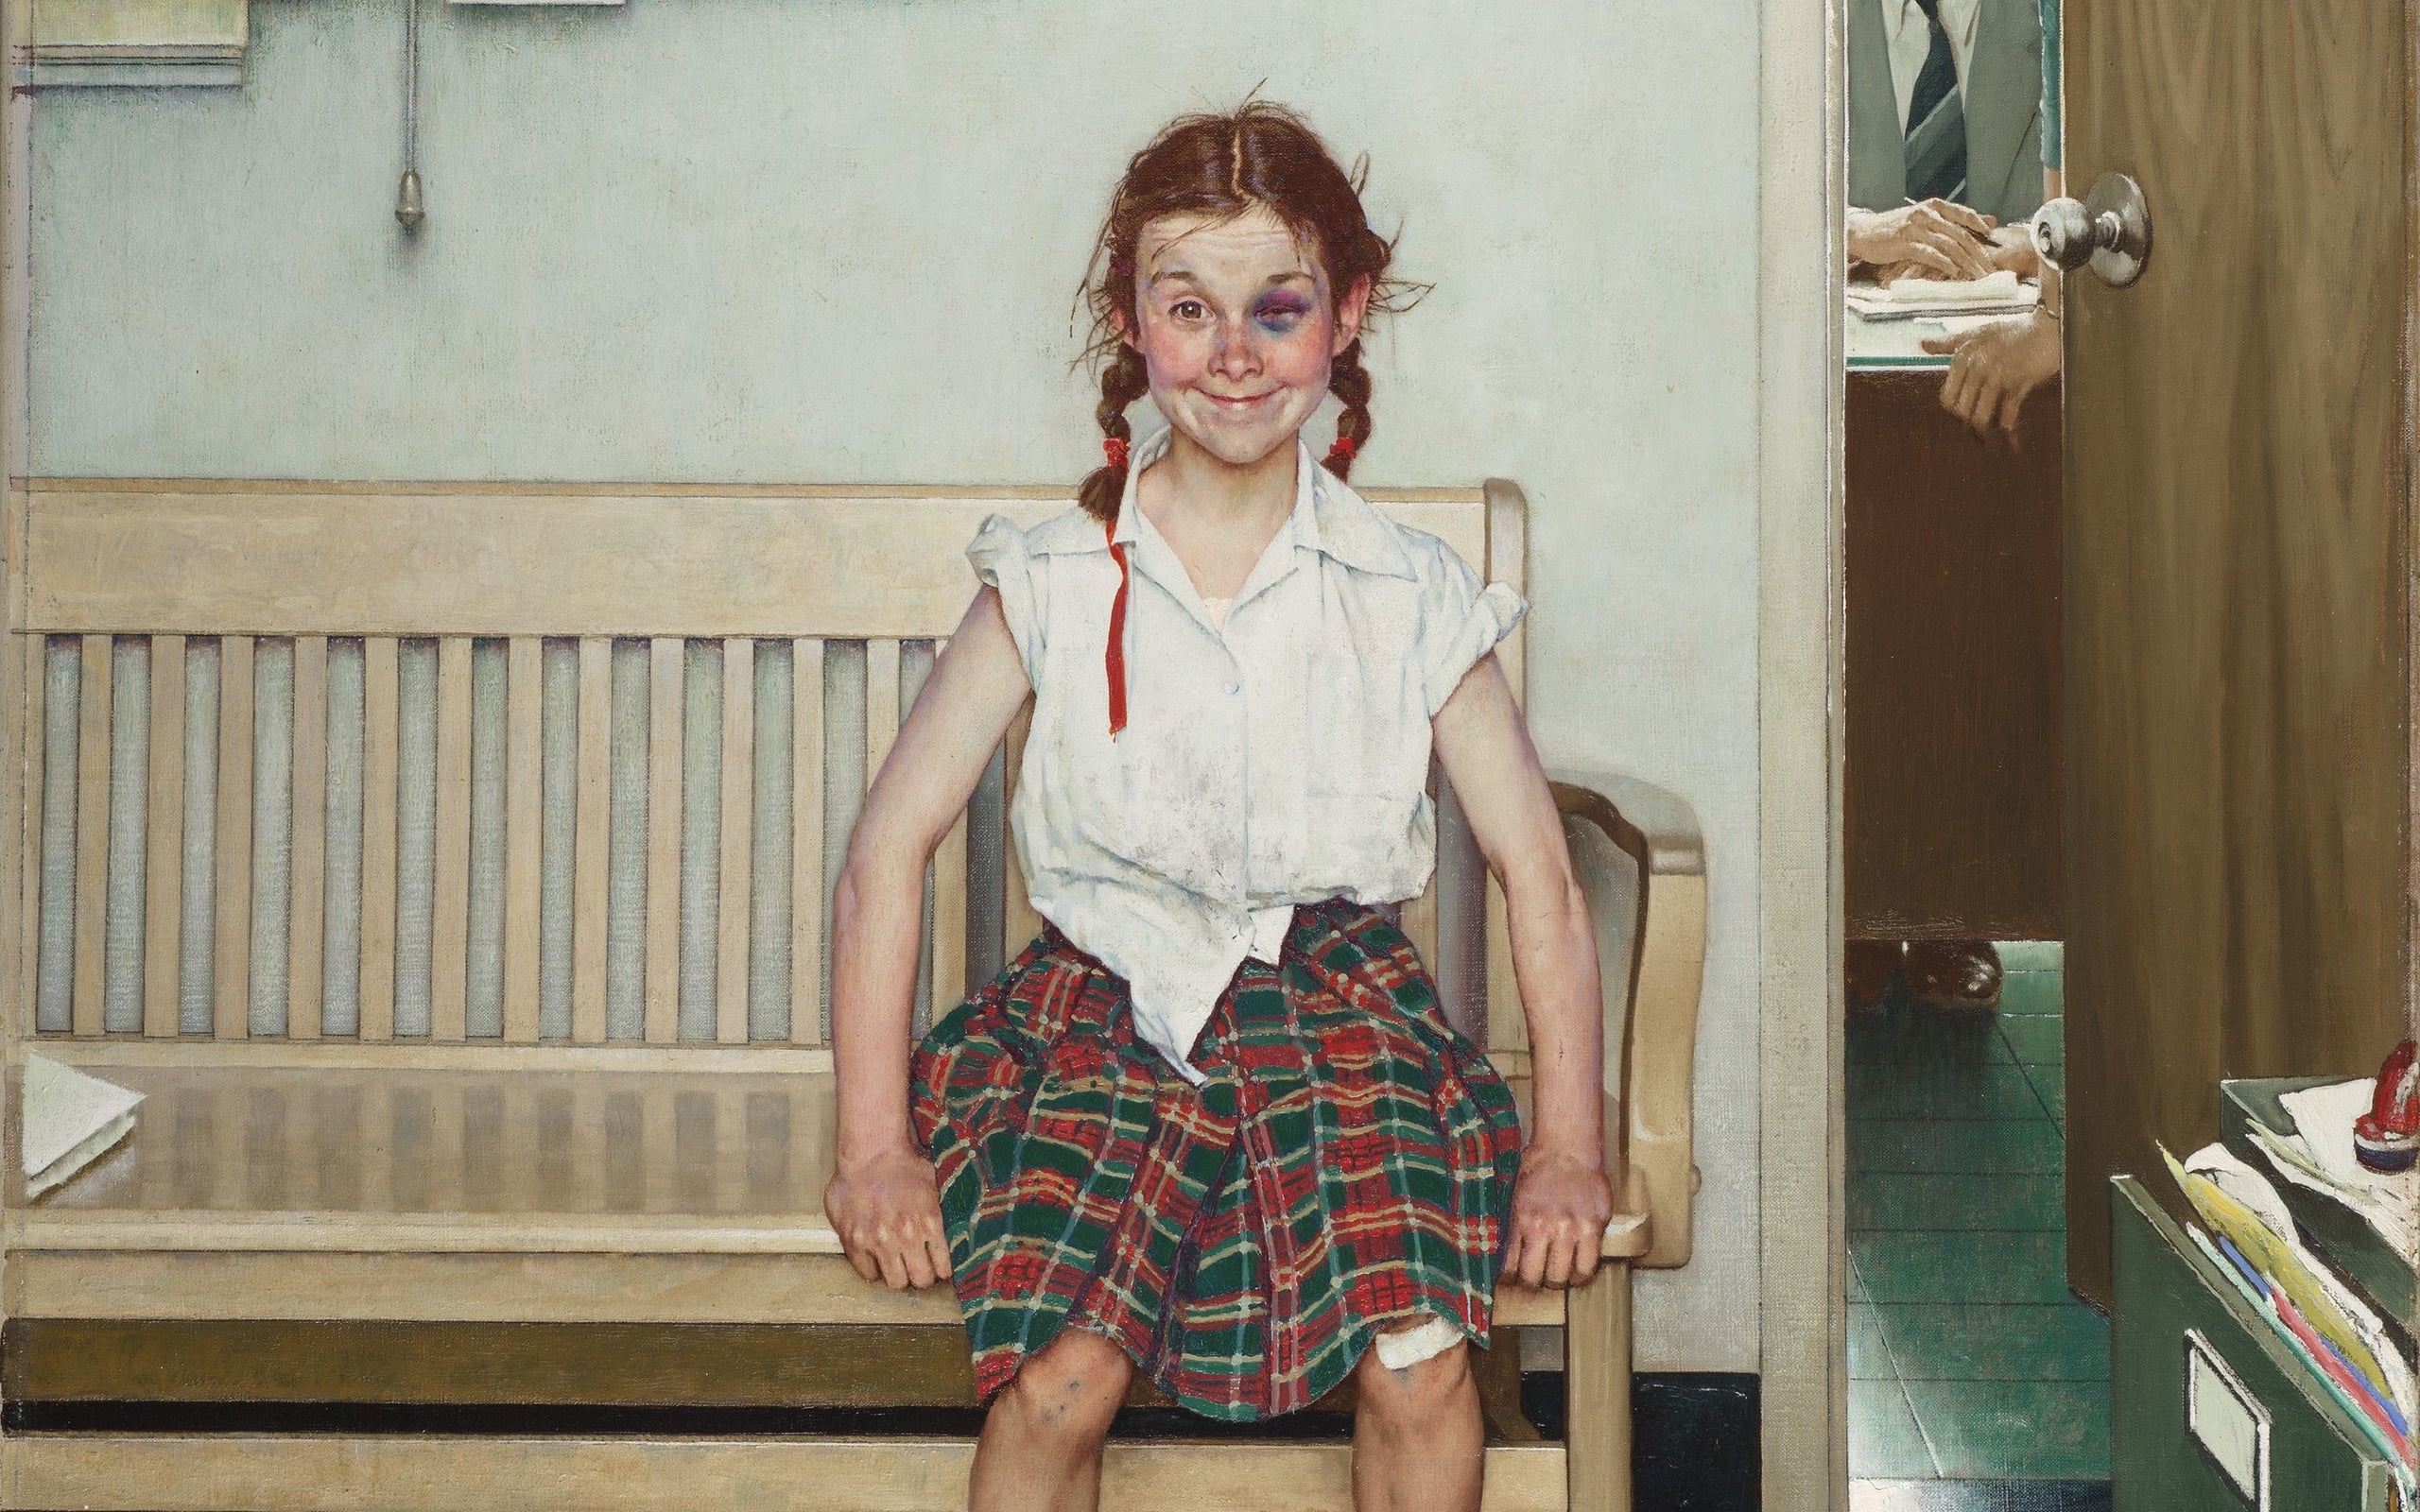 1953, Norman Rockwell, The Young Lady with a Shiner, American painter and illustrator